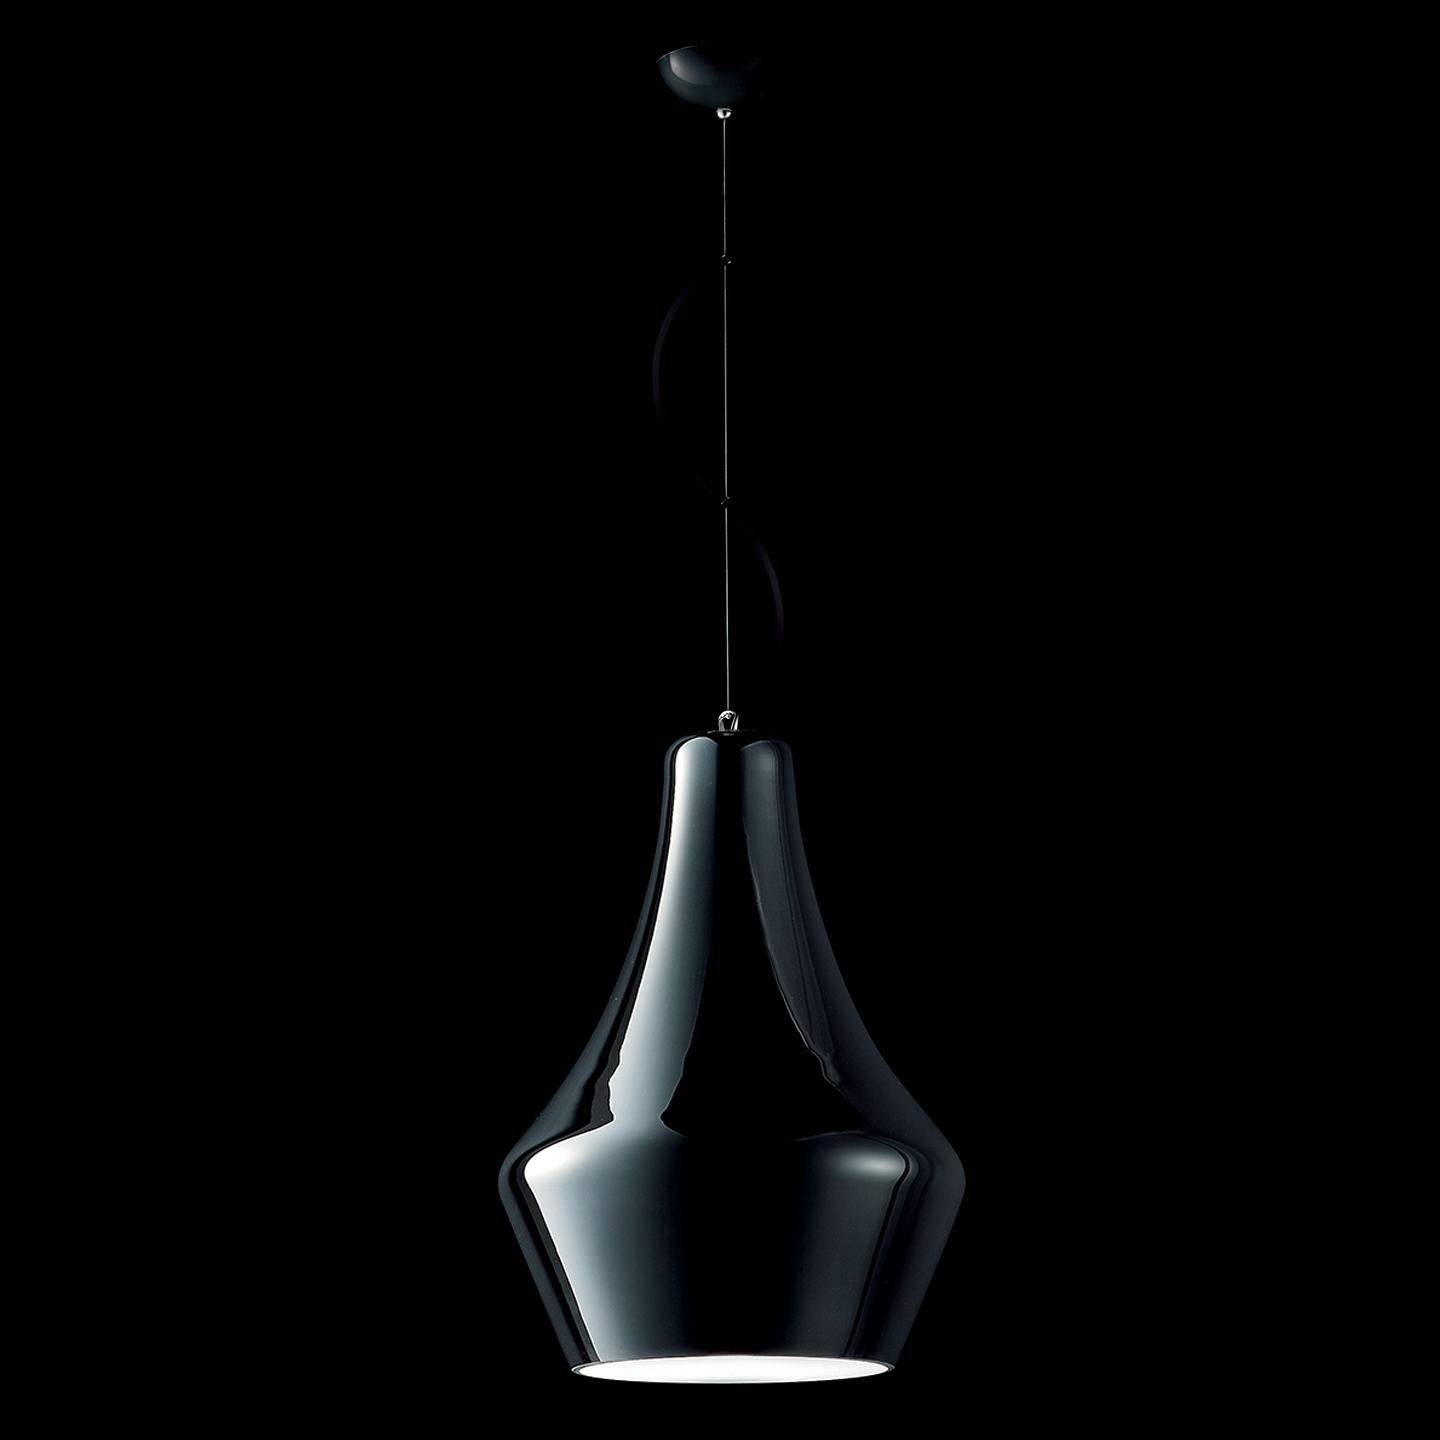 The Alma pendant is a striking and graceful pendant made with a traditional Murano hand blown glass technique called incamiciato (Italian for “jacketed” or “layered”), which requires multiple layers of glass during the blowing process. Created on a